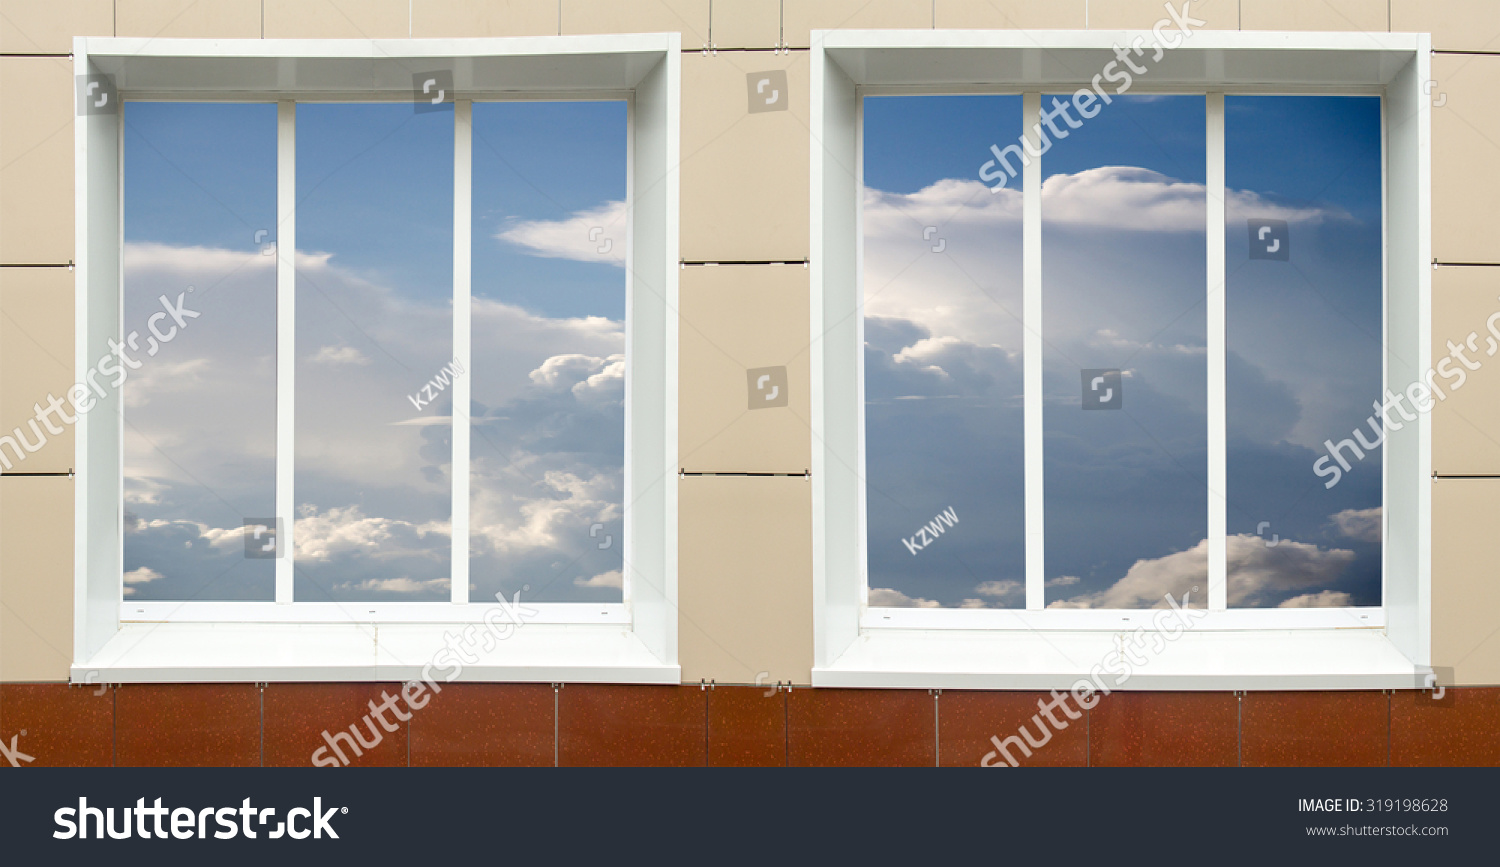 a window in the house, the sky clouds in a glass #319198628